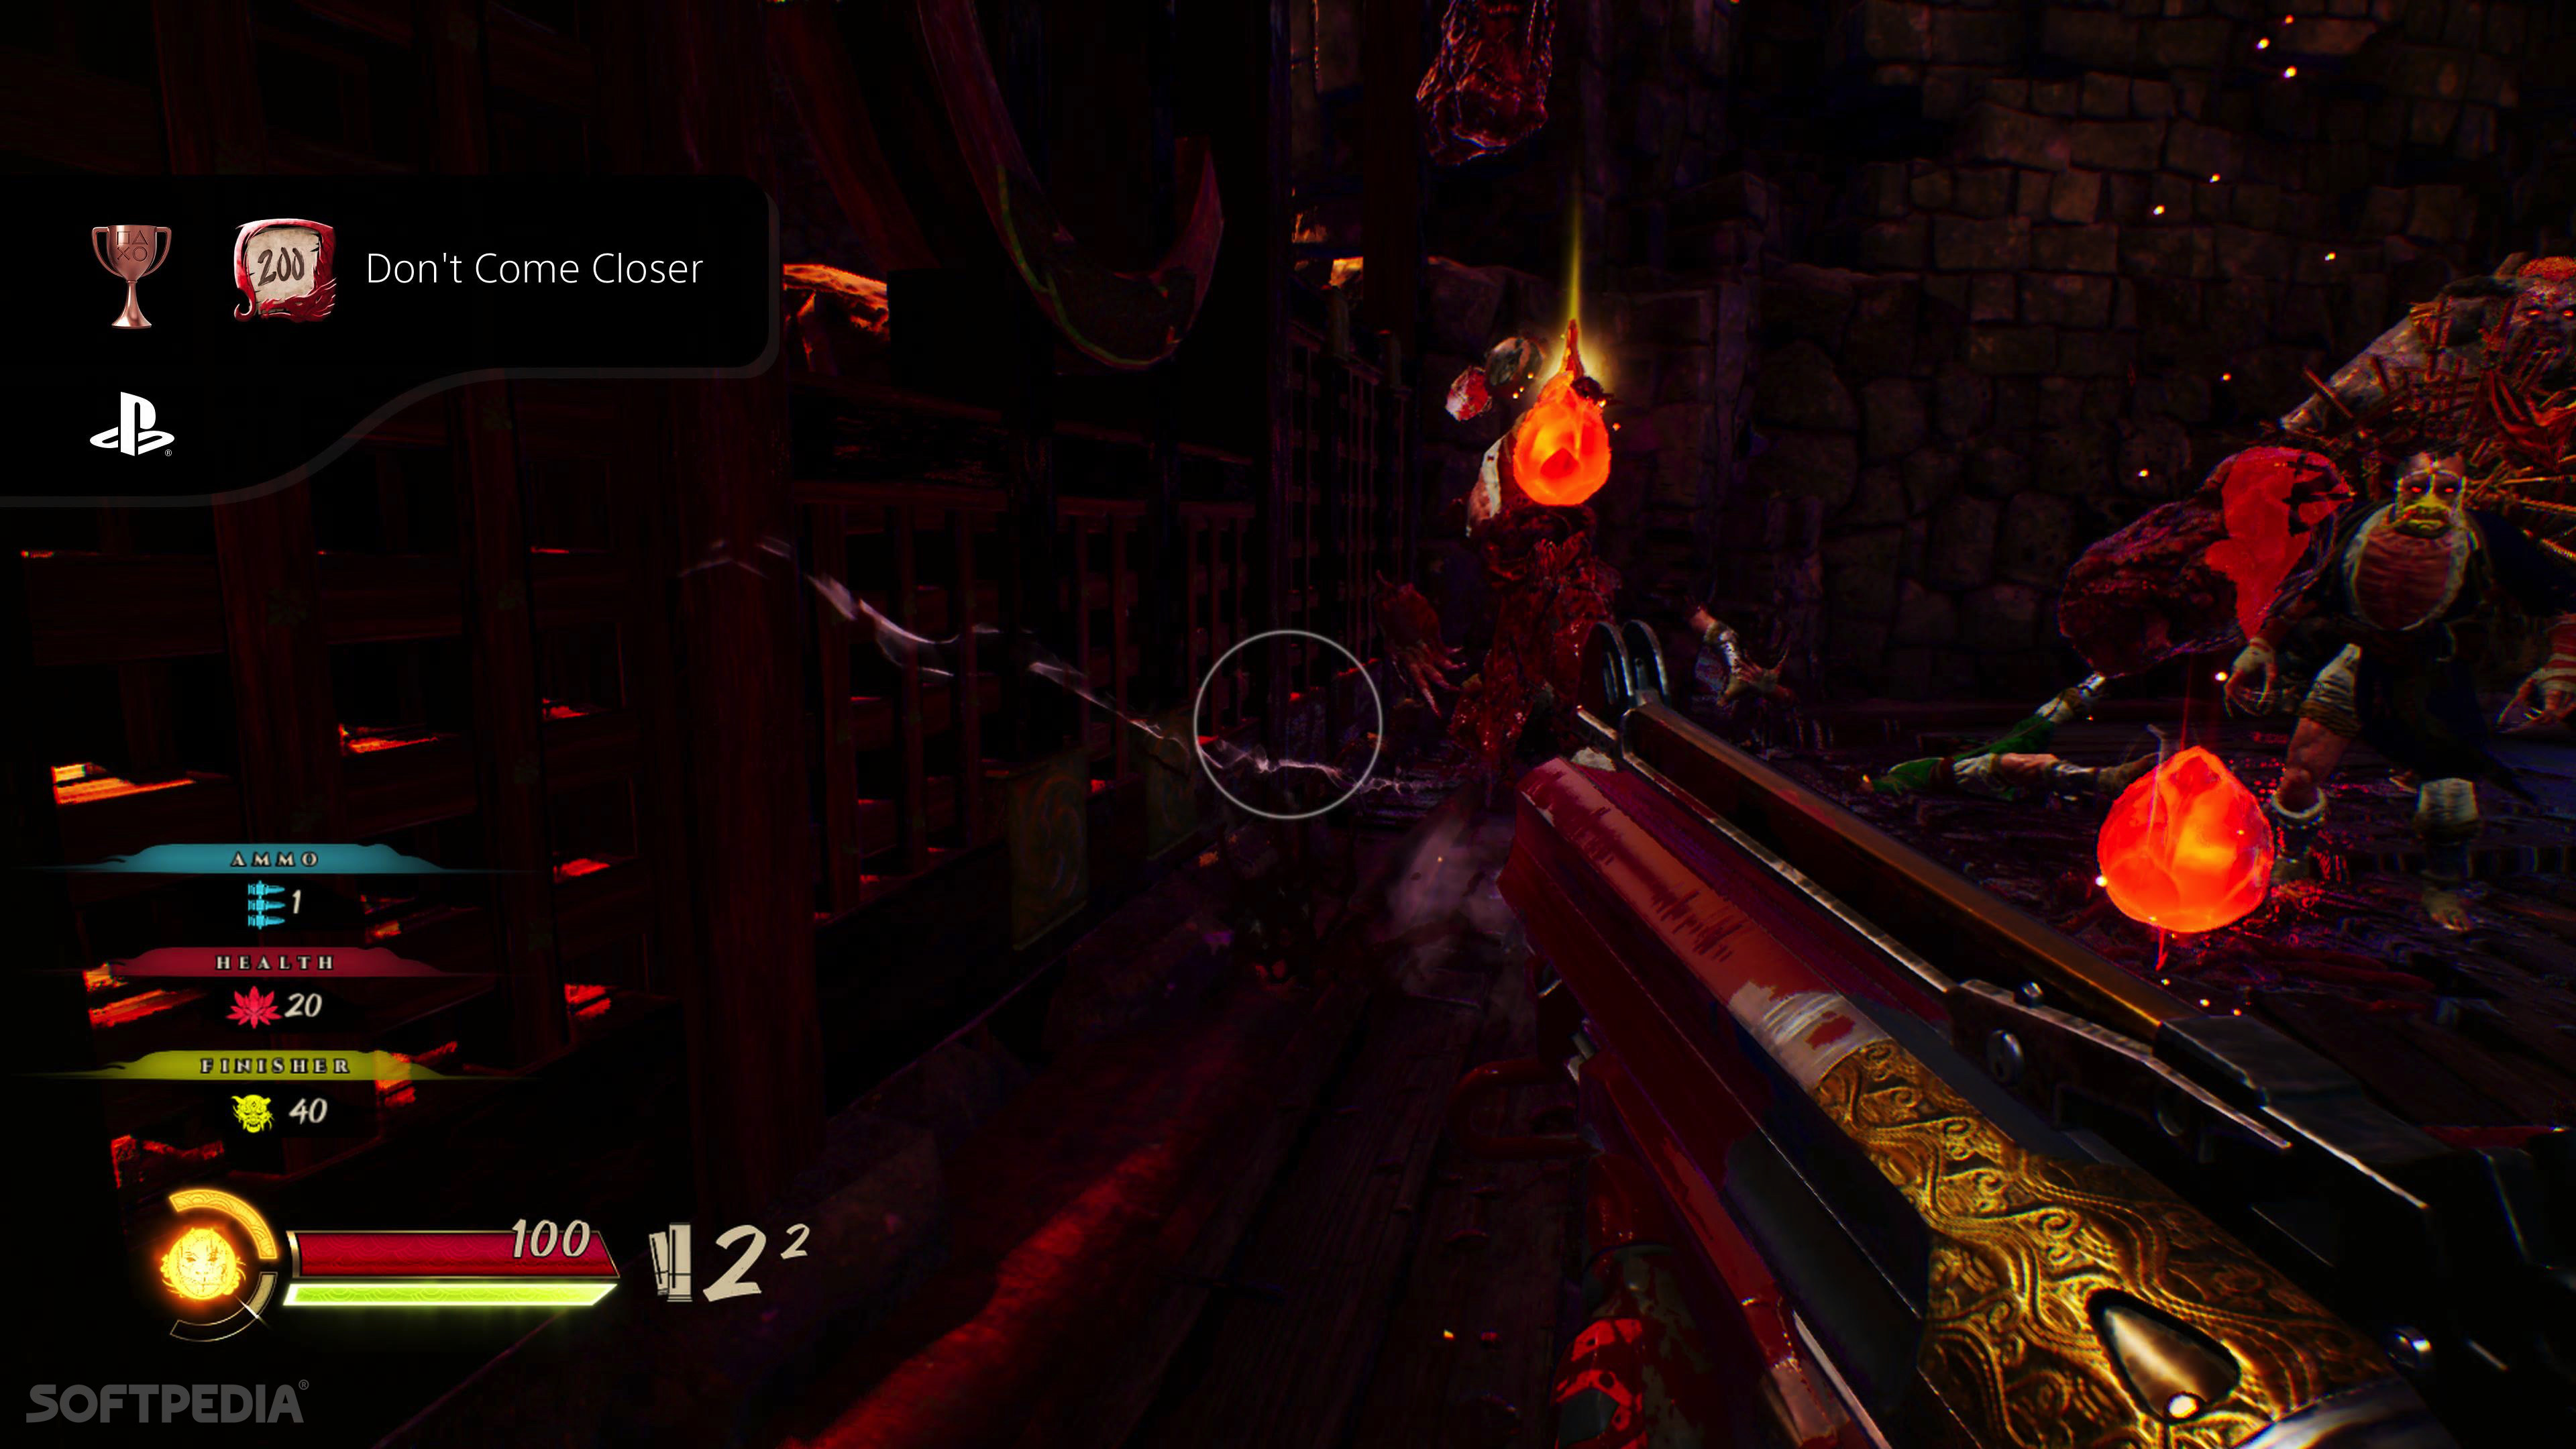 Shadow Warrior 3 PS4 Review - Impulse Gamer